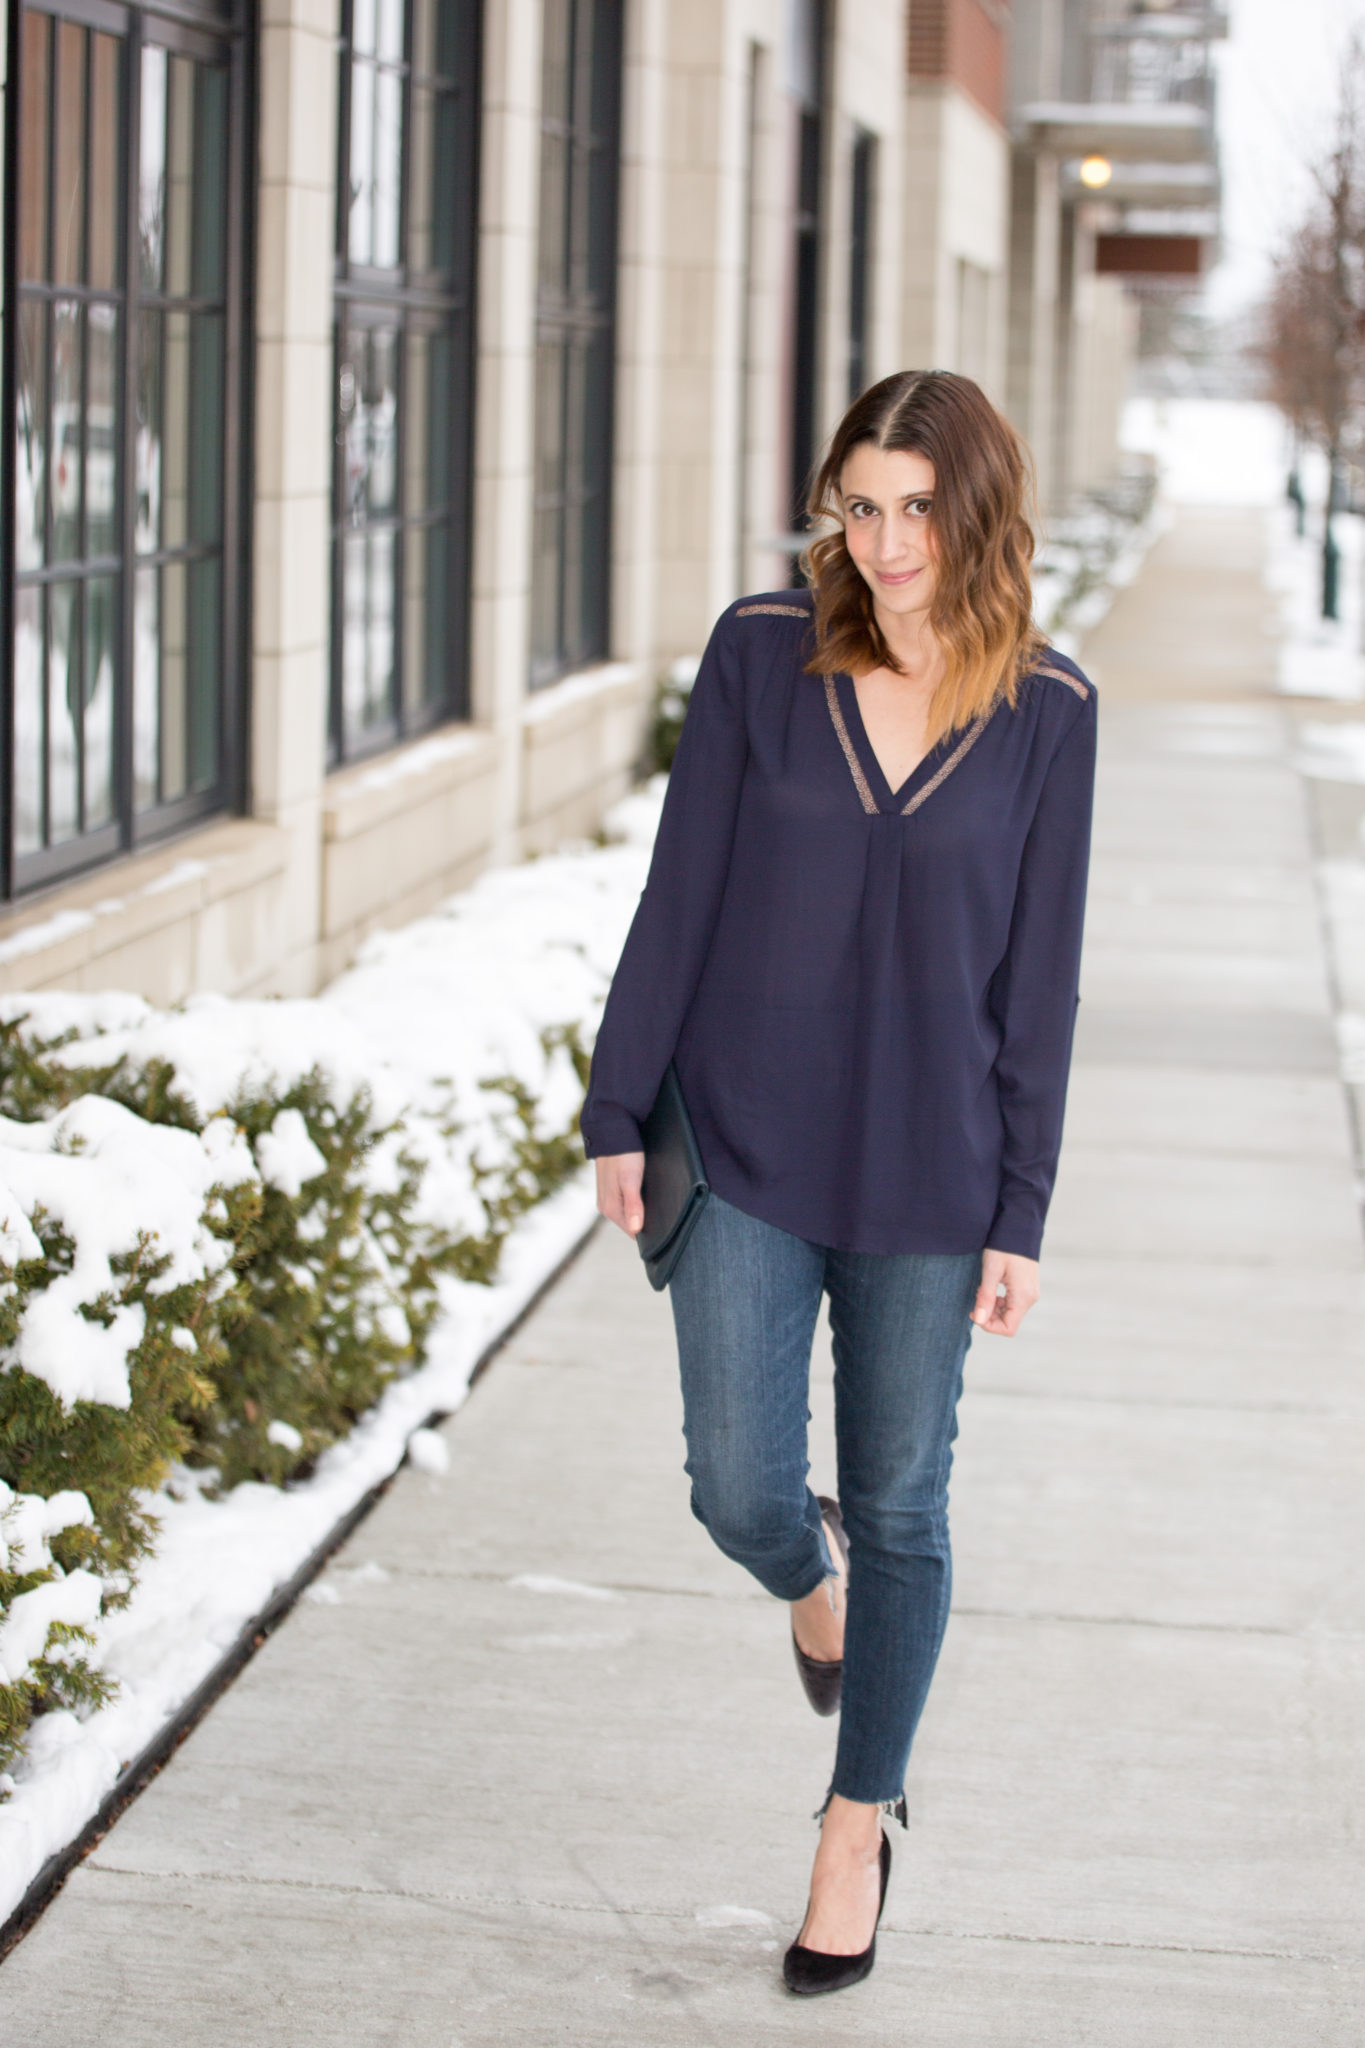 heartloom holiday top | what to wear for a casual winter date night on allweareblog.com